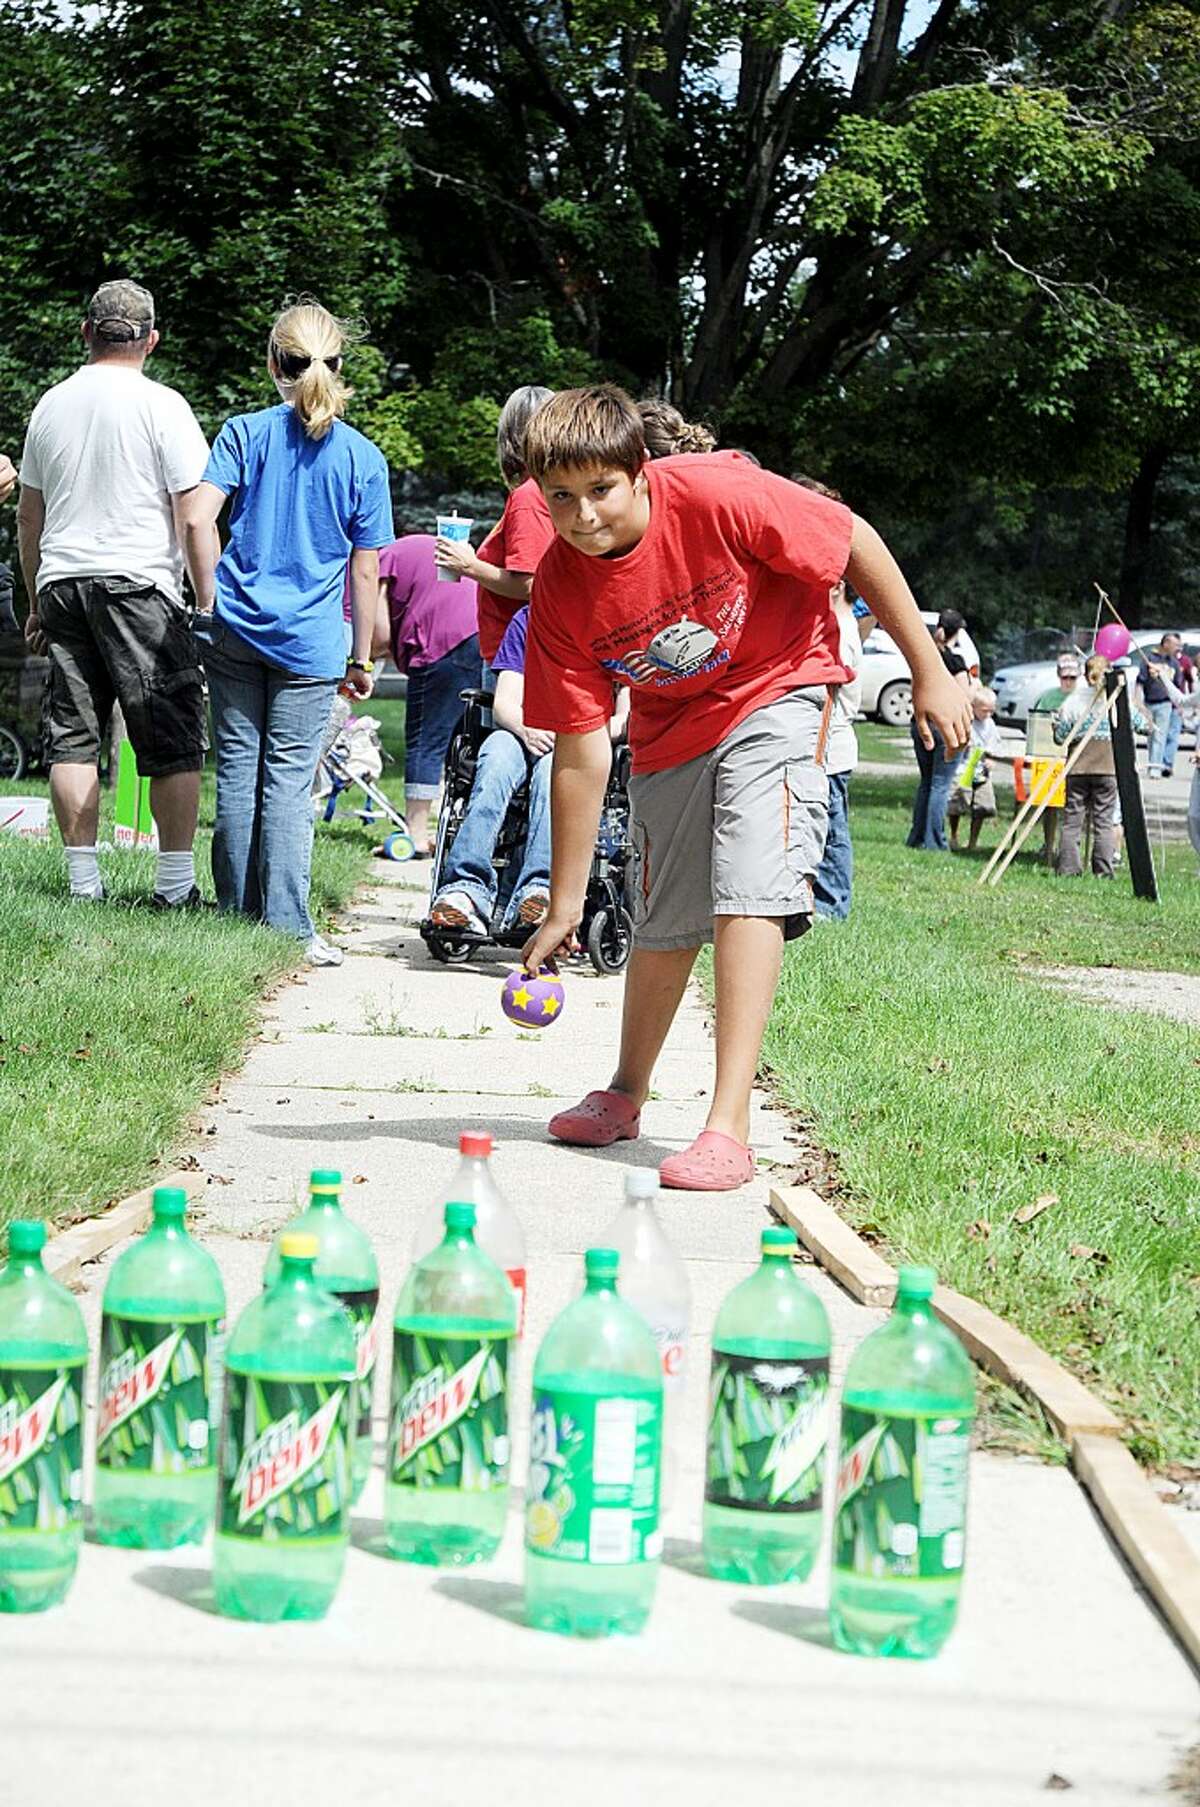 STRIKE!: A child participates in one of several games at the Hersey United Methodist Church on Saturday. In addition to children’s games, the River Town Festival included a flea market, a parade, live music, a pancake eating contest, softball tournament and cookouts. (Pioneer photo/Kyle Leppek)